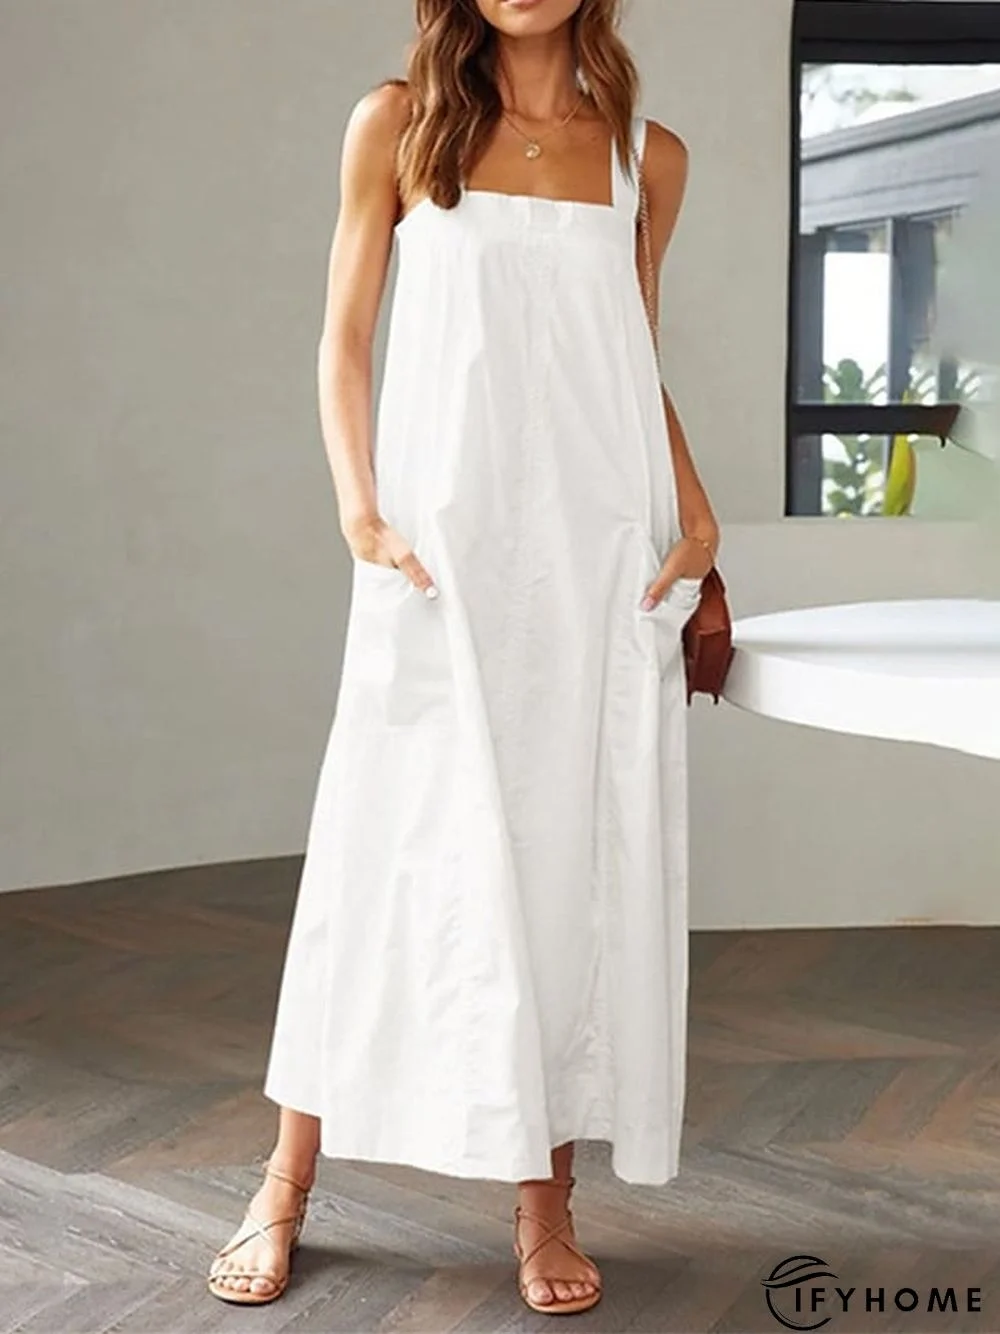 Women's Long Dress Maxi Dress Casual Dress Swing Dress Black Dress Pure Color Fashion Casual Outdoor Daily Date Backless Pocket Sleeveless Strap Dress Regular Fit Black White Yellow Spring Summer S M | IFYHOME